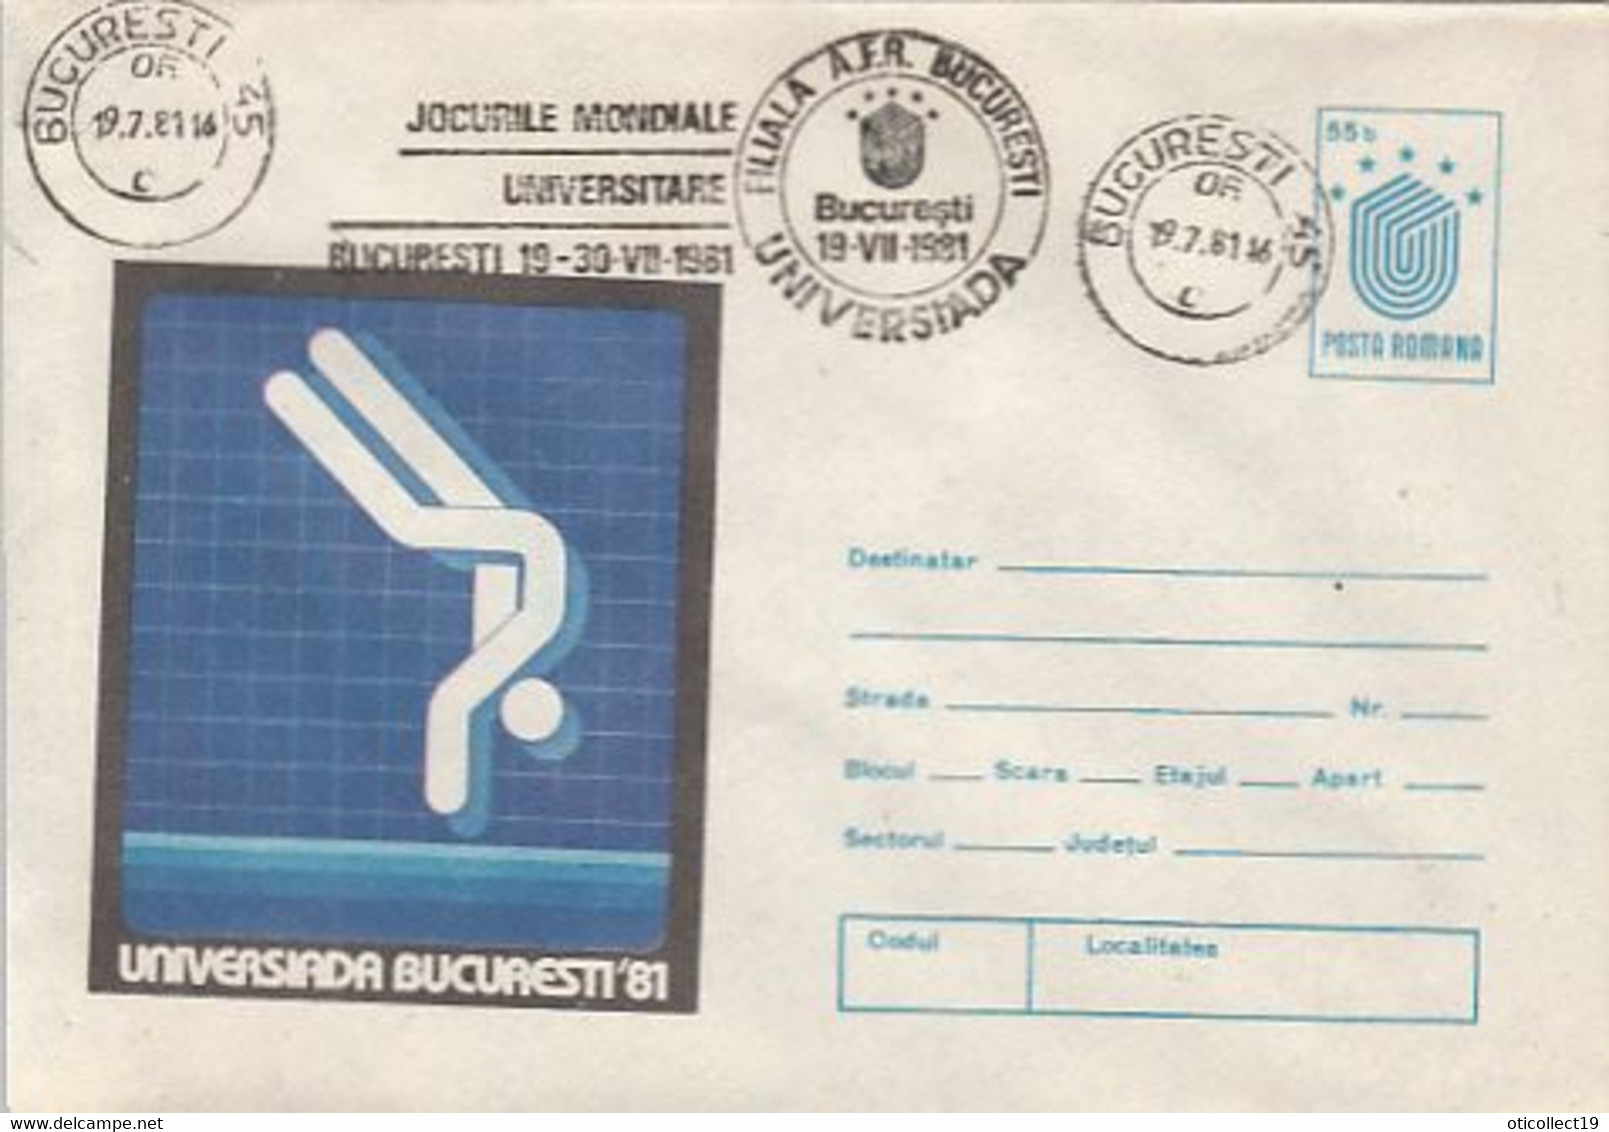 SPORTS, DIVING, WORLD UNIVERSITY GAMES, COVER STATIONERY, 1981, ROMANIA - Immersione